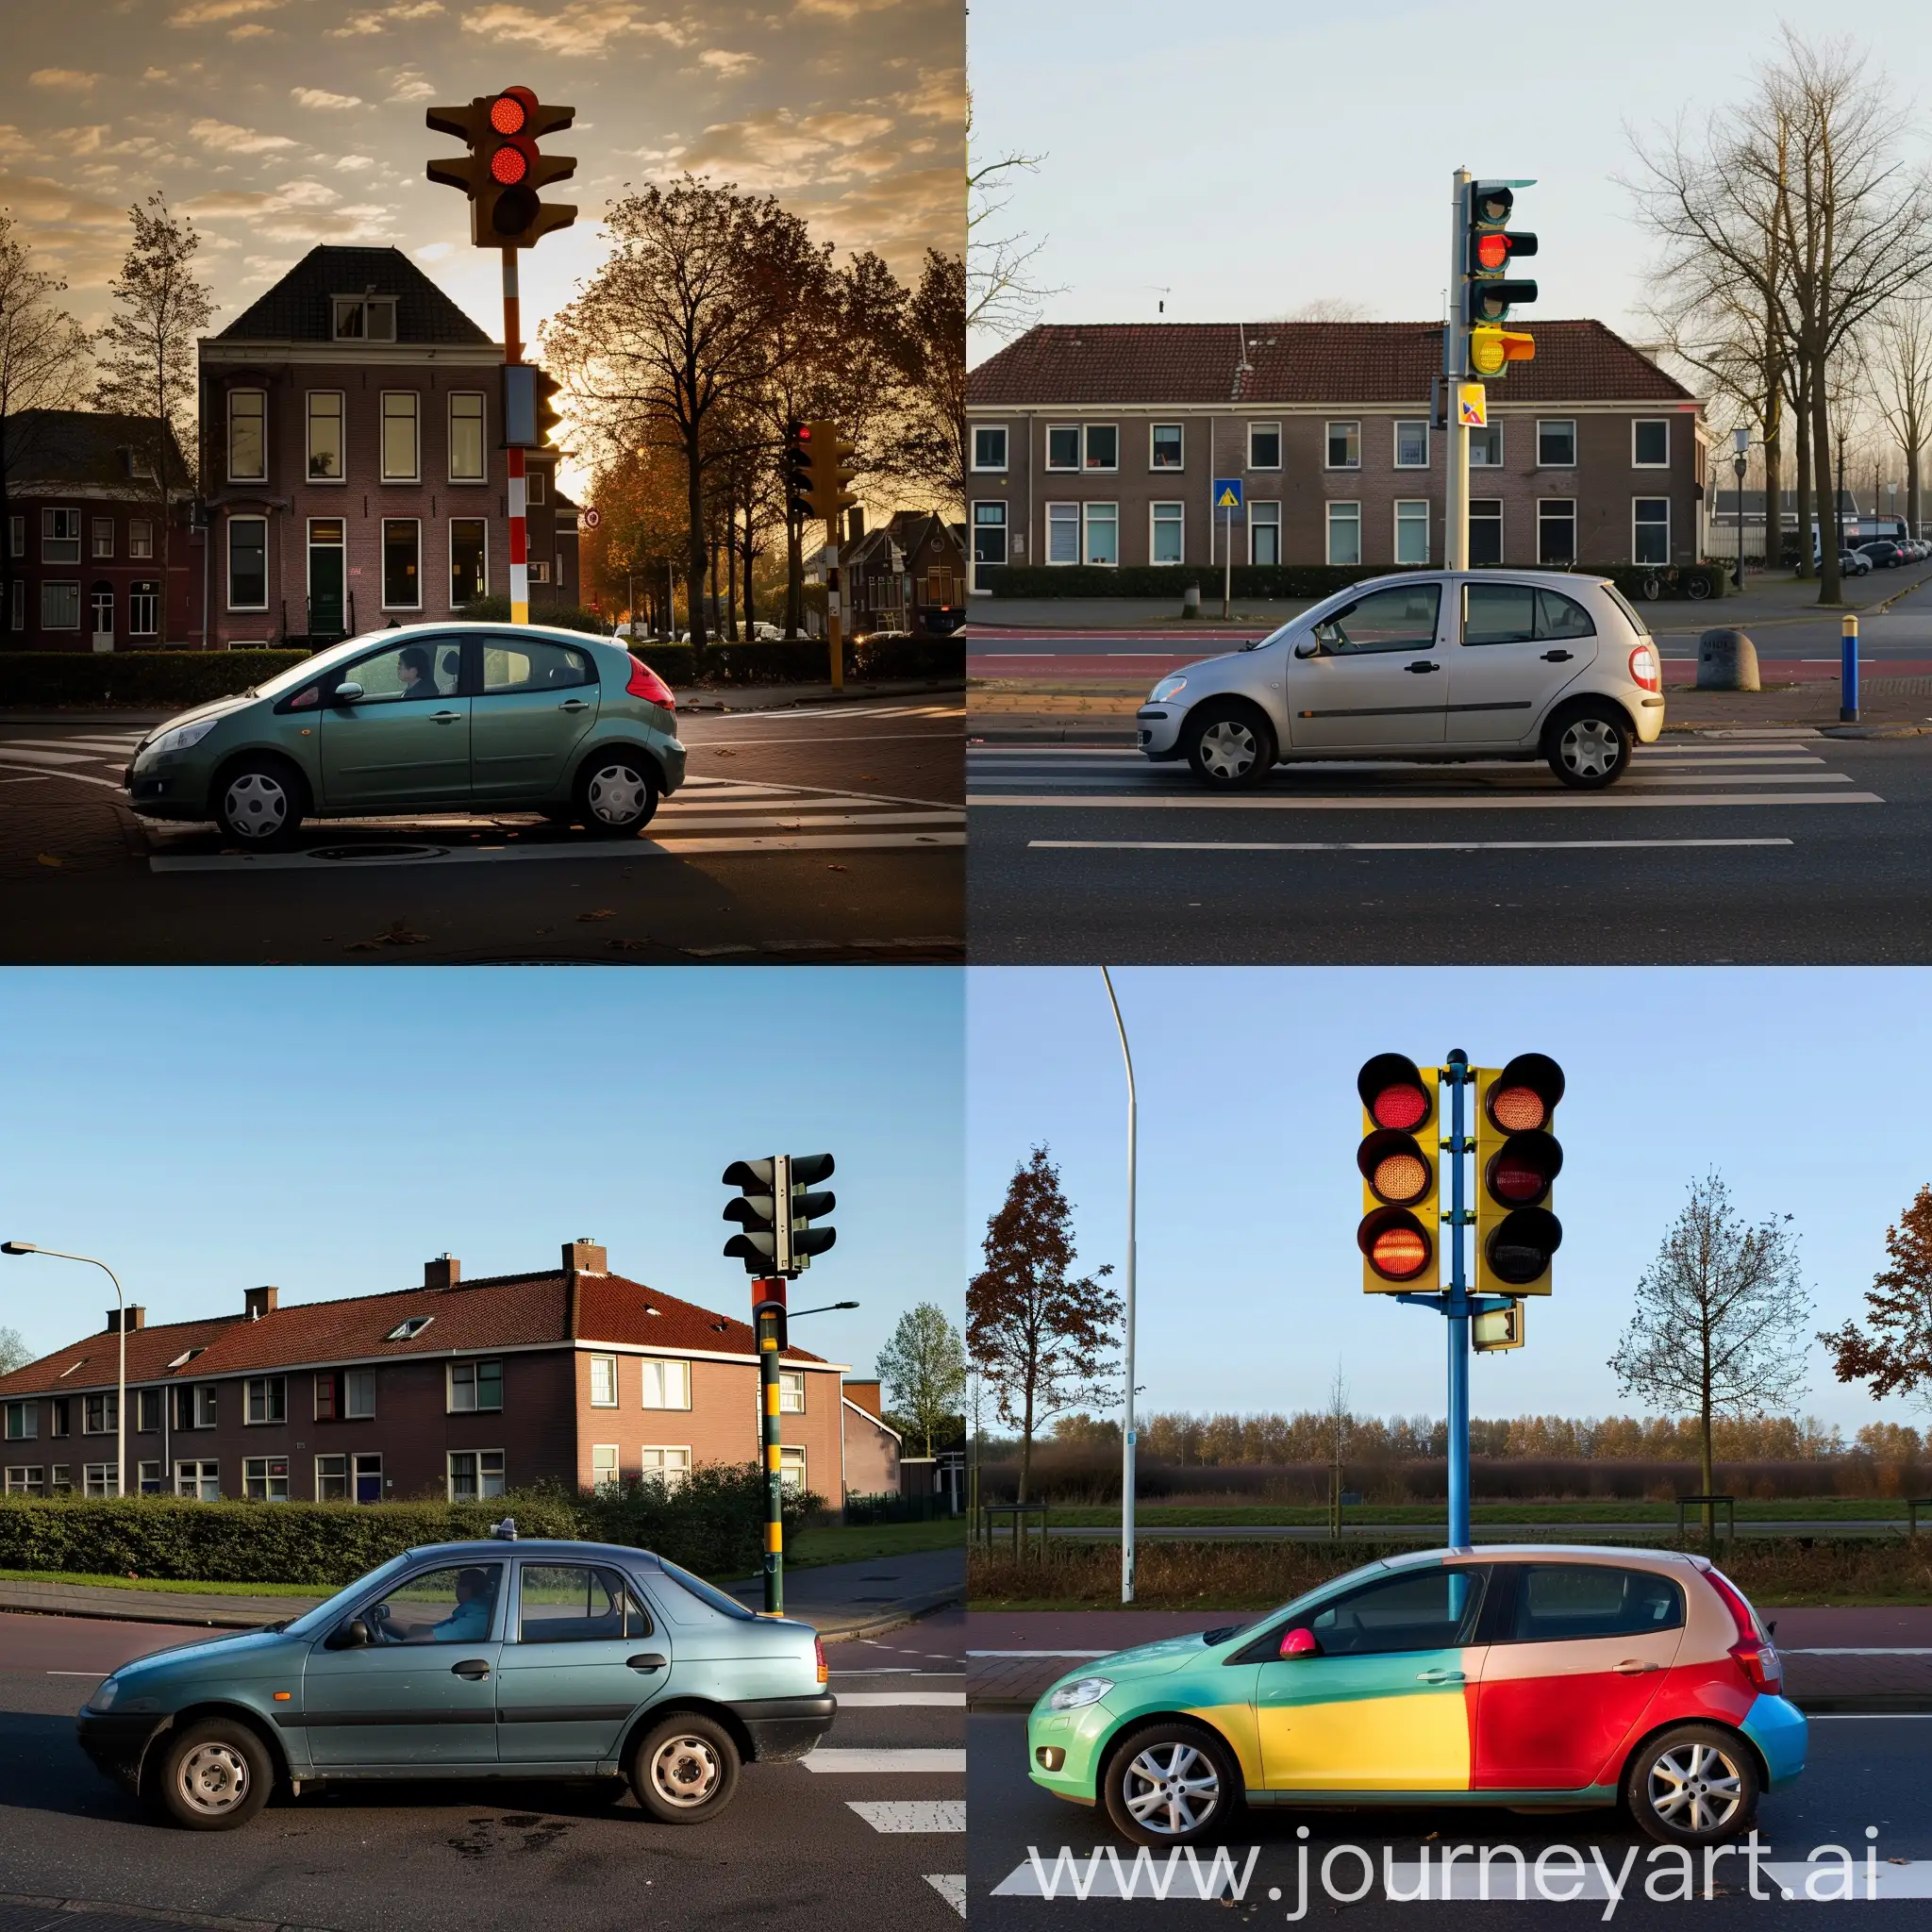 Learning-Traffic-Rules-Car-at-Netherlands-Stoplight-for-Students